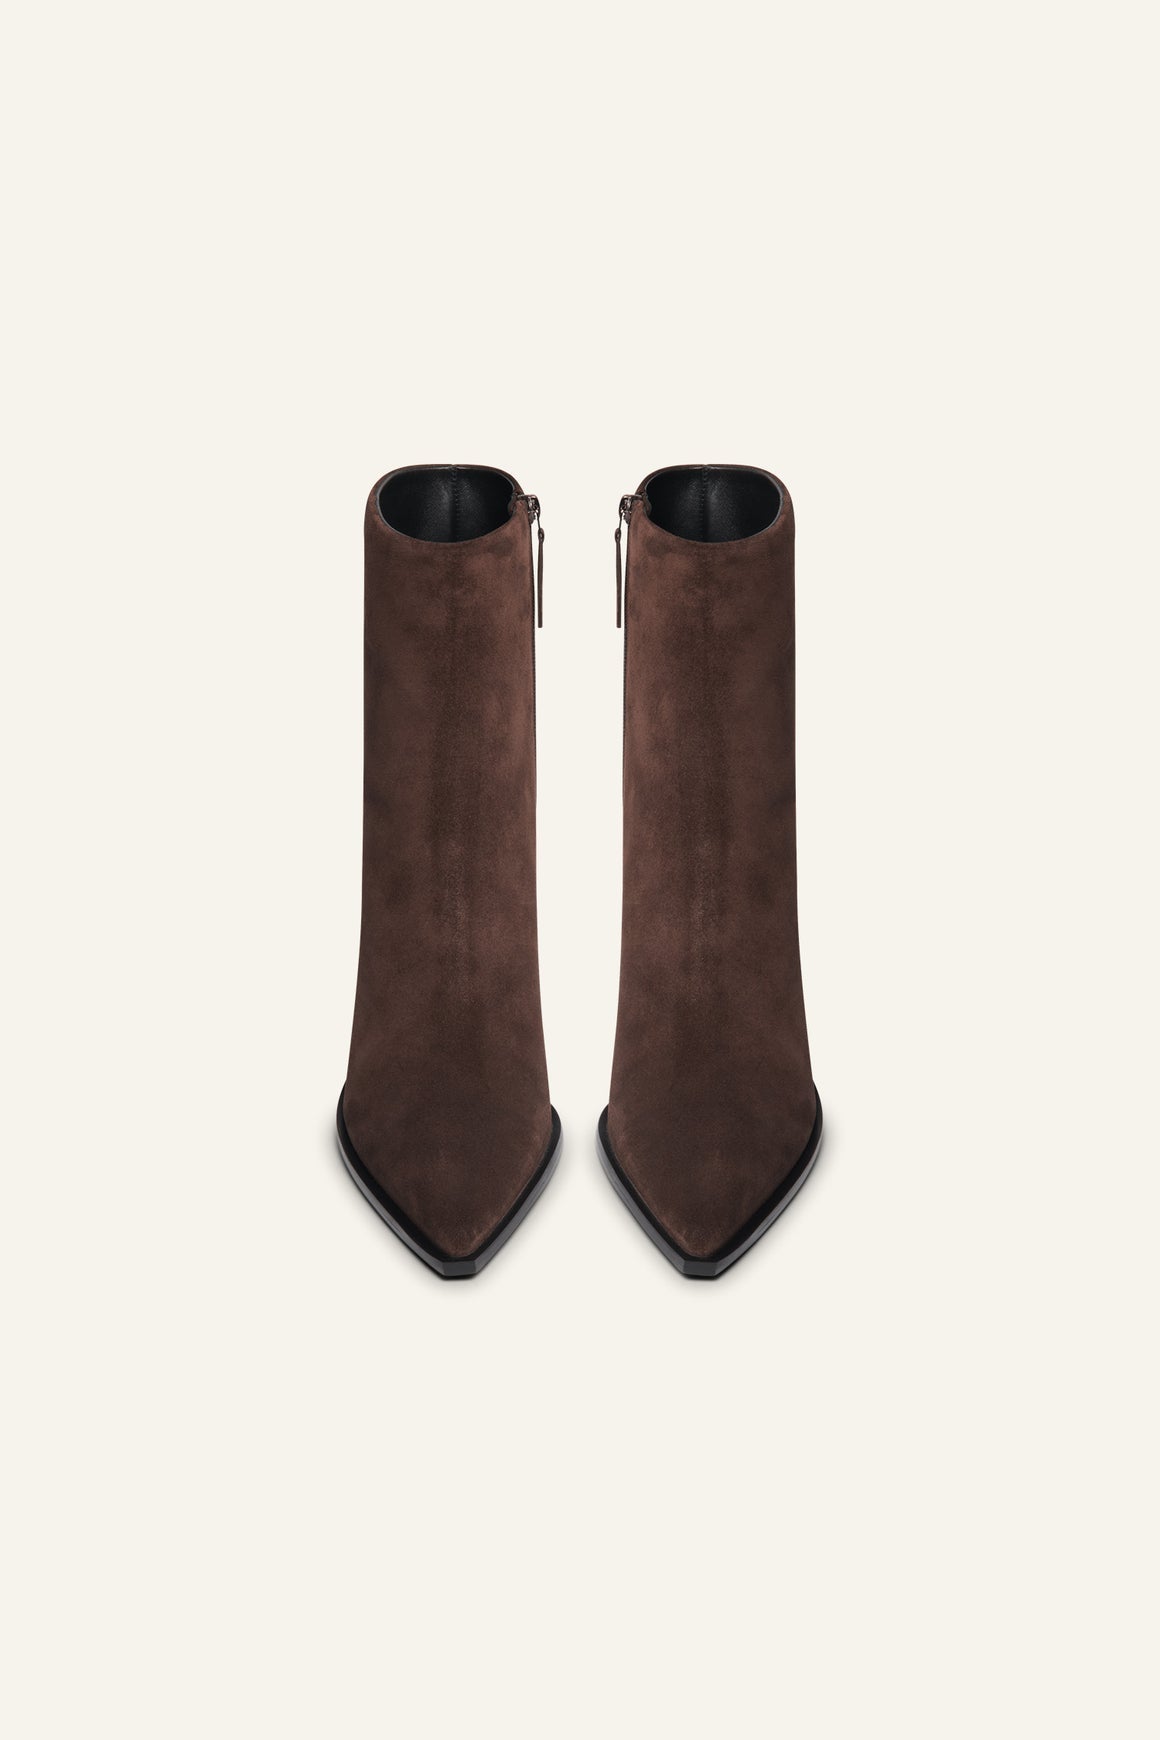 A.Emery | The Odin Boot - Mocha Suede